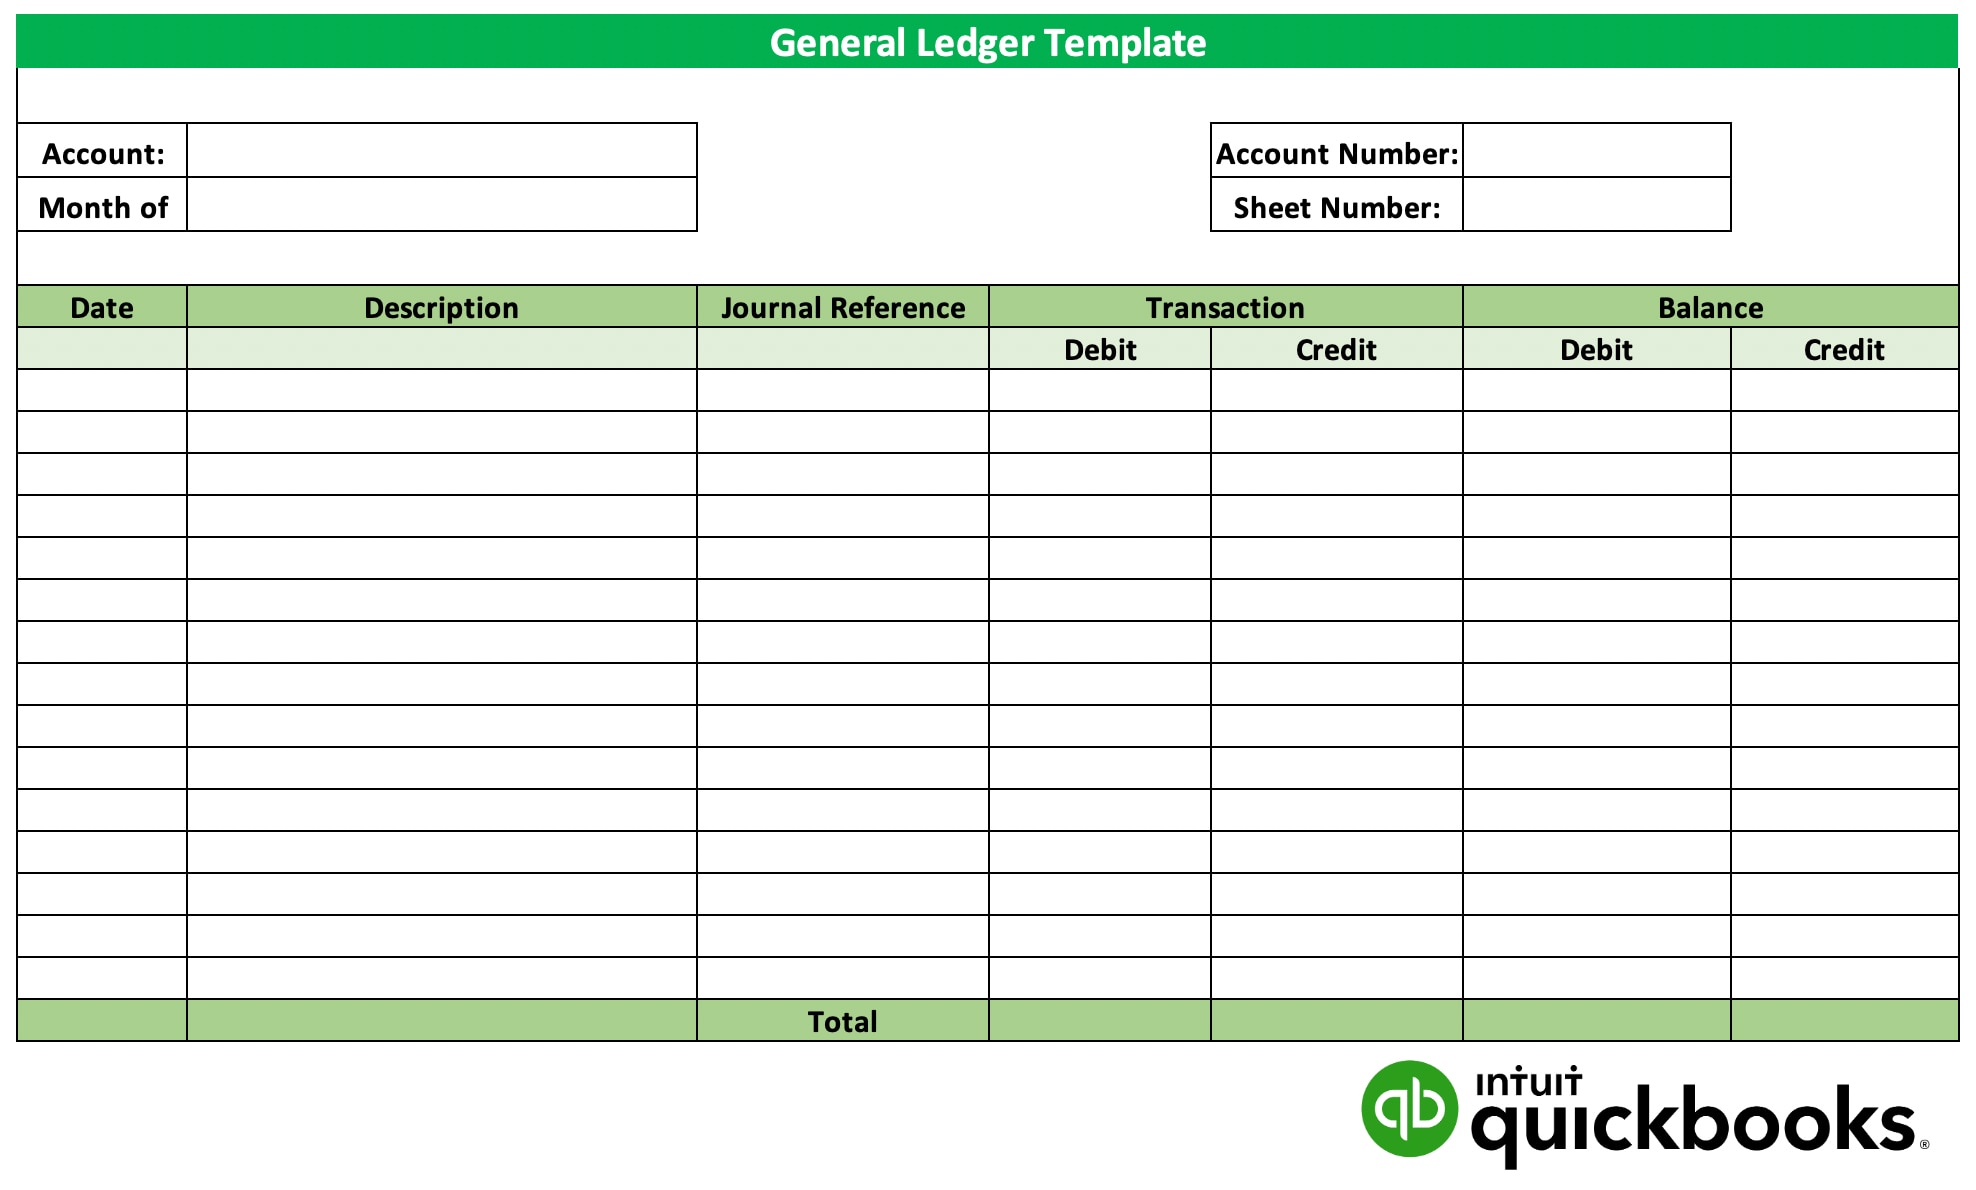 what-is-a-general-ledger-account-definition-and-example